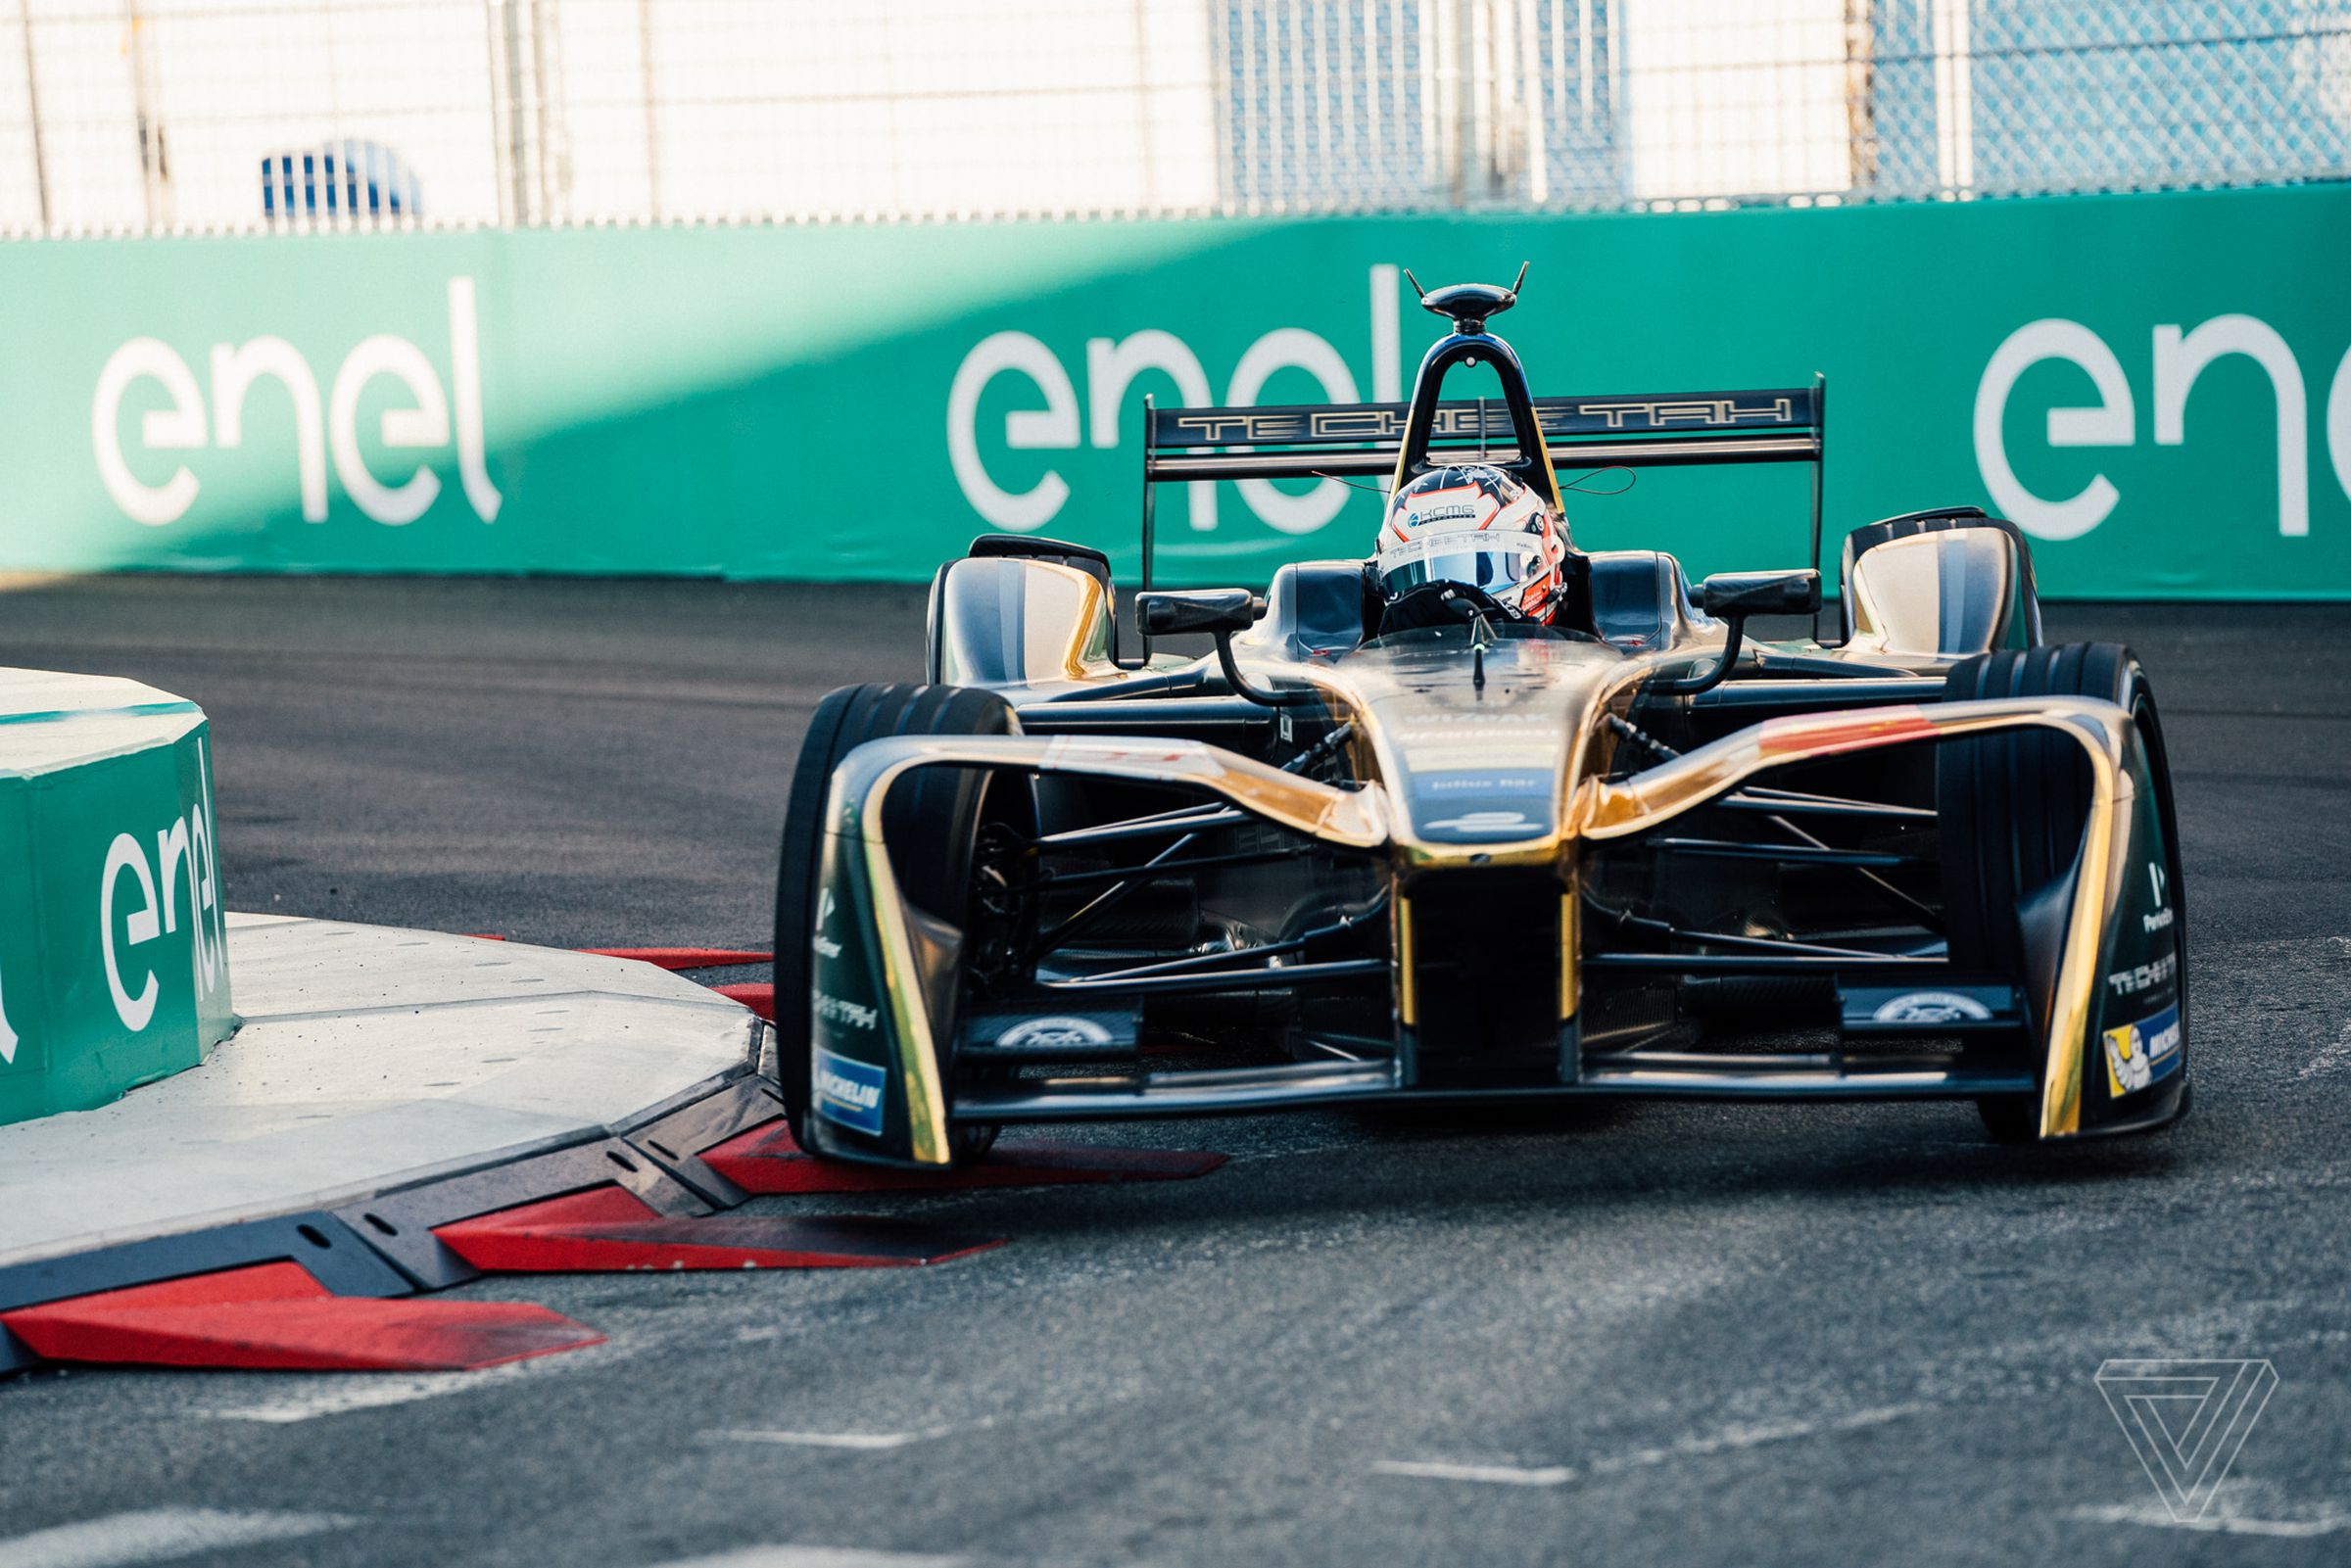 Techeetah, which is the only team that isn’t aligned with a manufacturer, took home 2nd and 3rd place finishes on Saturday. 